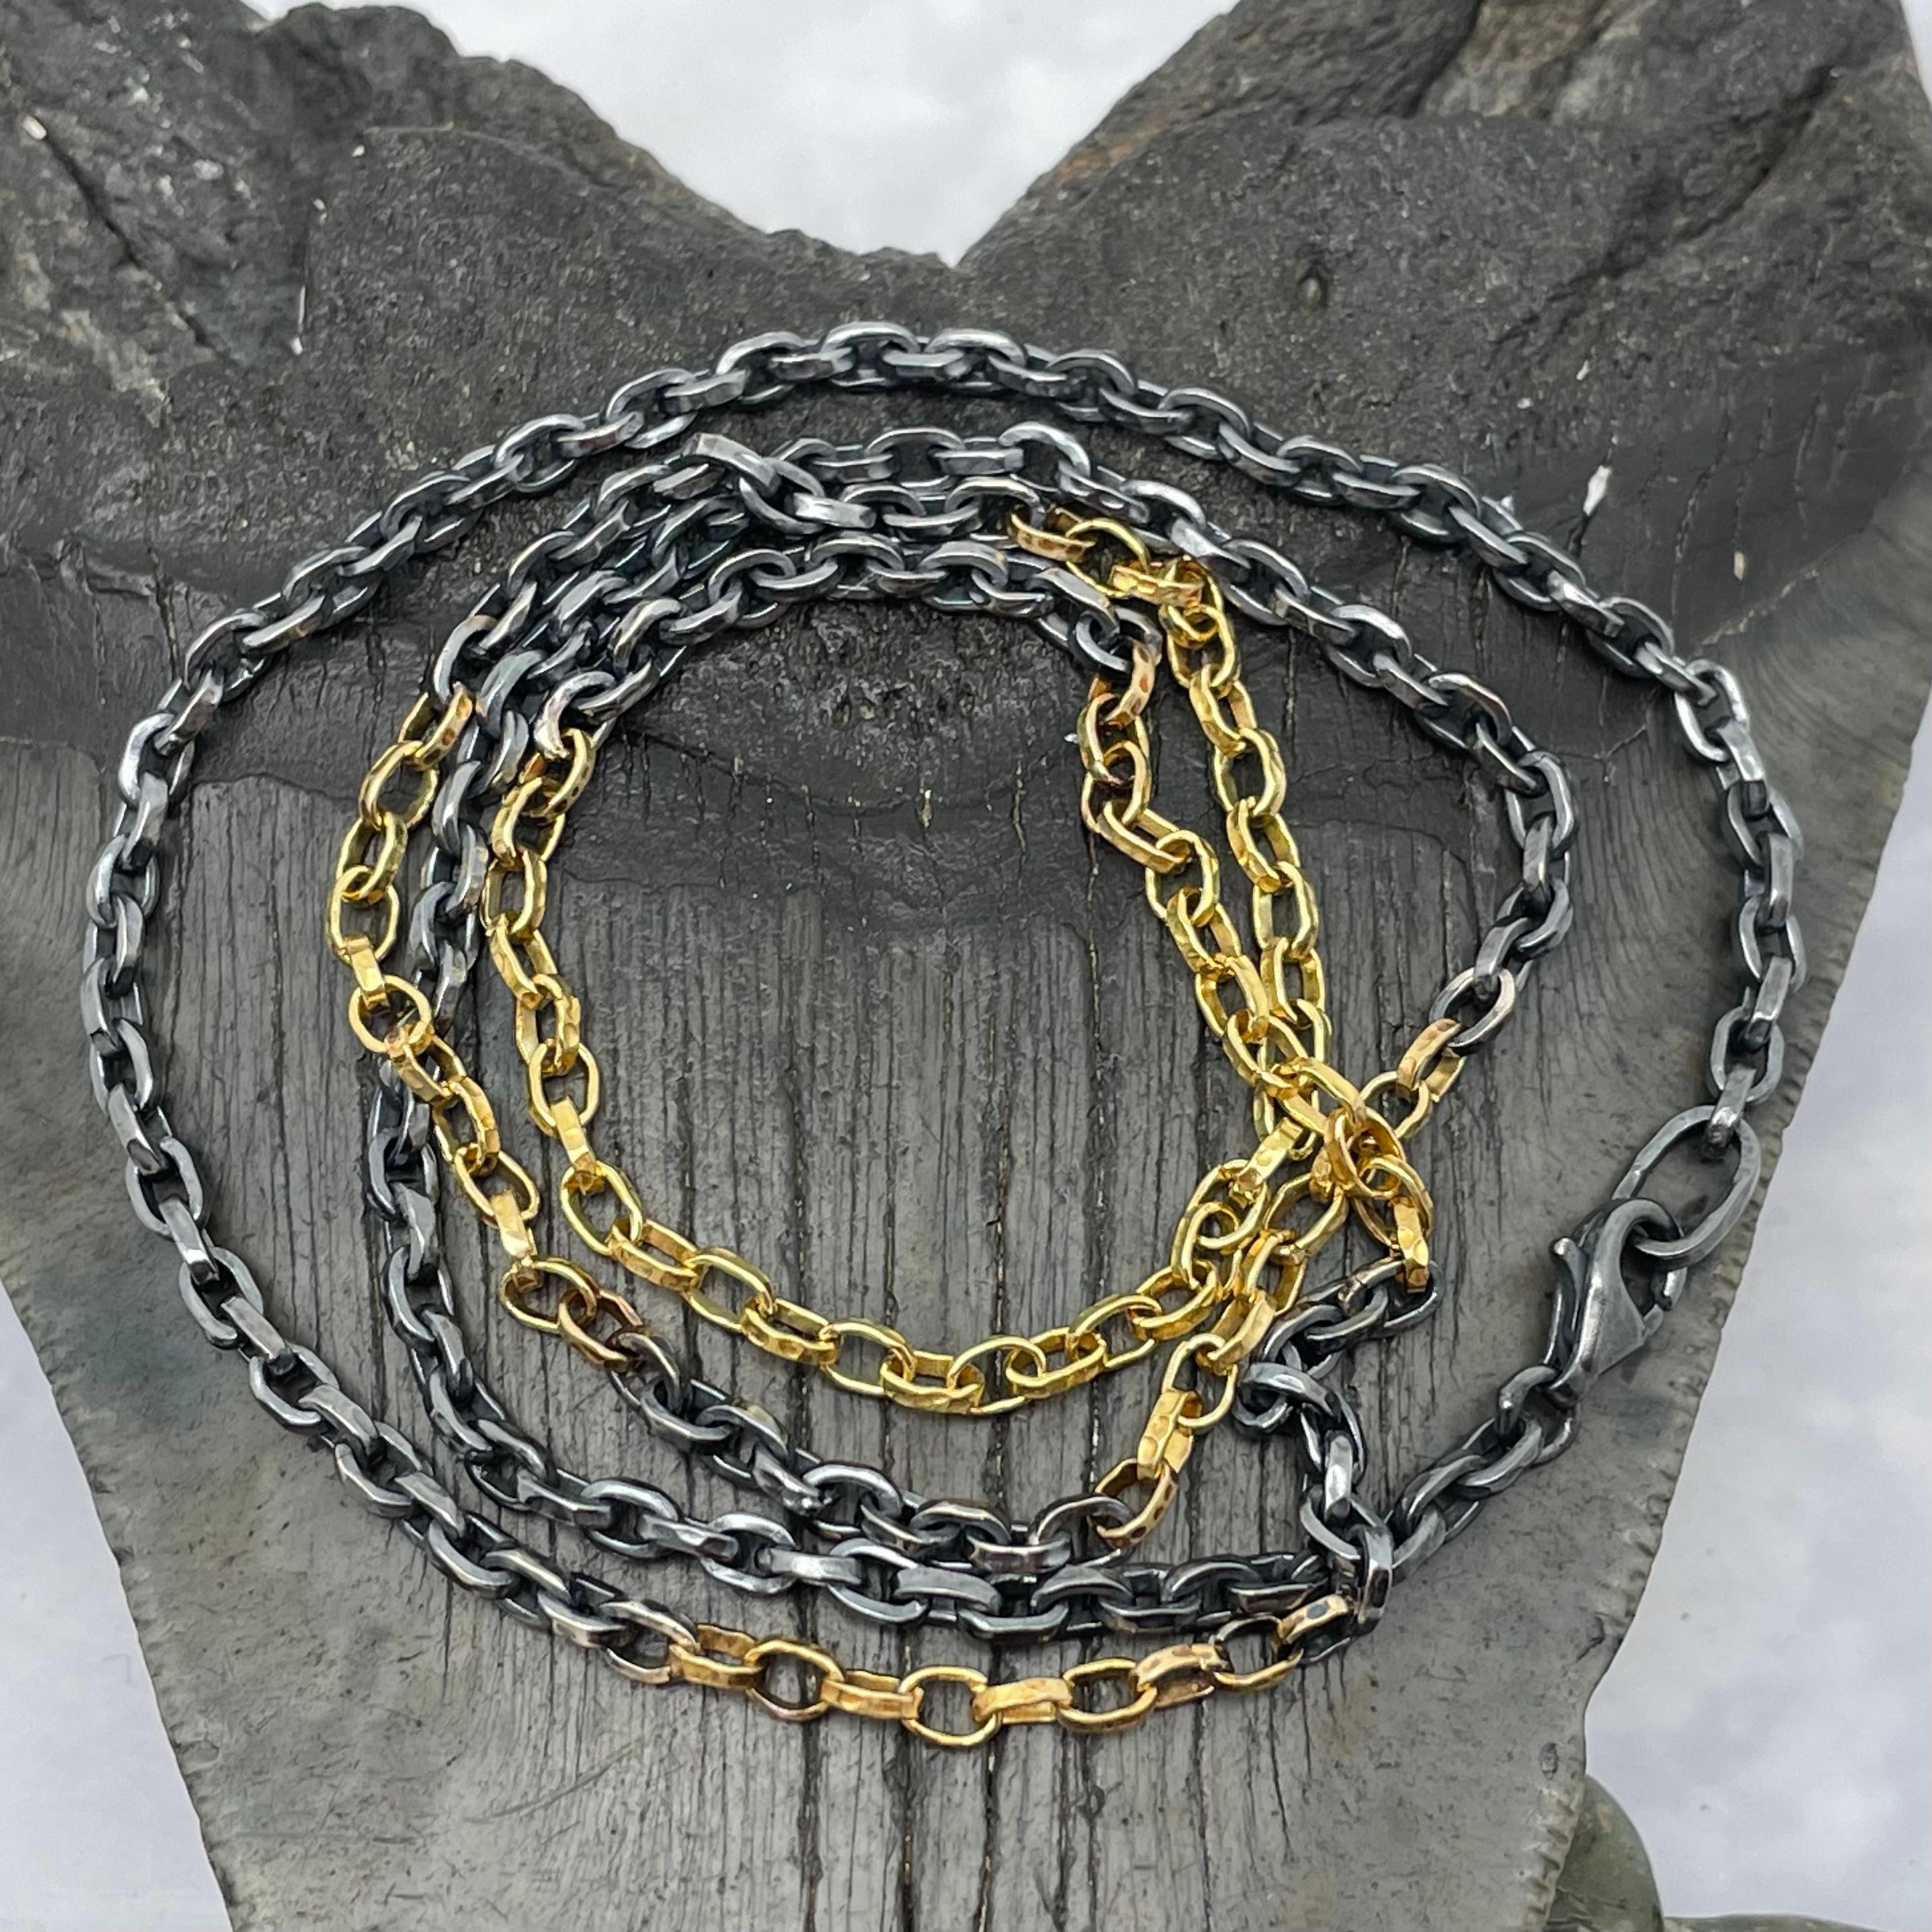 A unique organic design features 32 handmade links of 1.1 mm width 18K gold at bottom, then (after a separator of oxidized silver links between) 12 links, and finally 9 links of gold.  The matte-finish gold with rough oxidized silver provides a rich